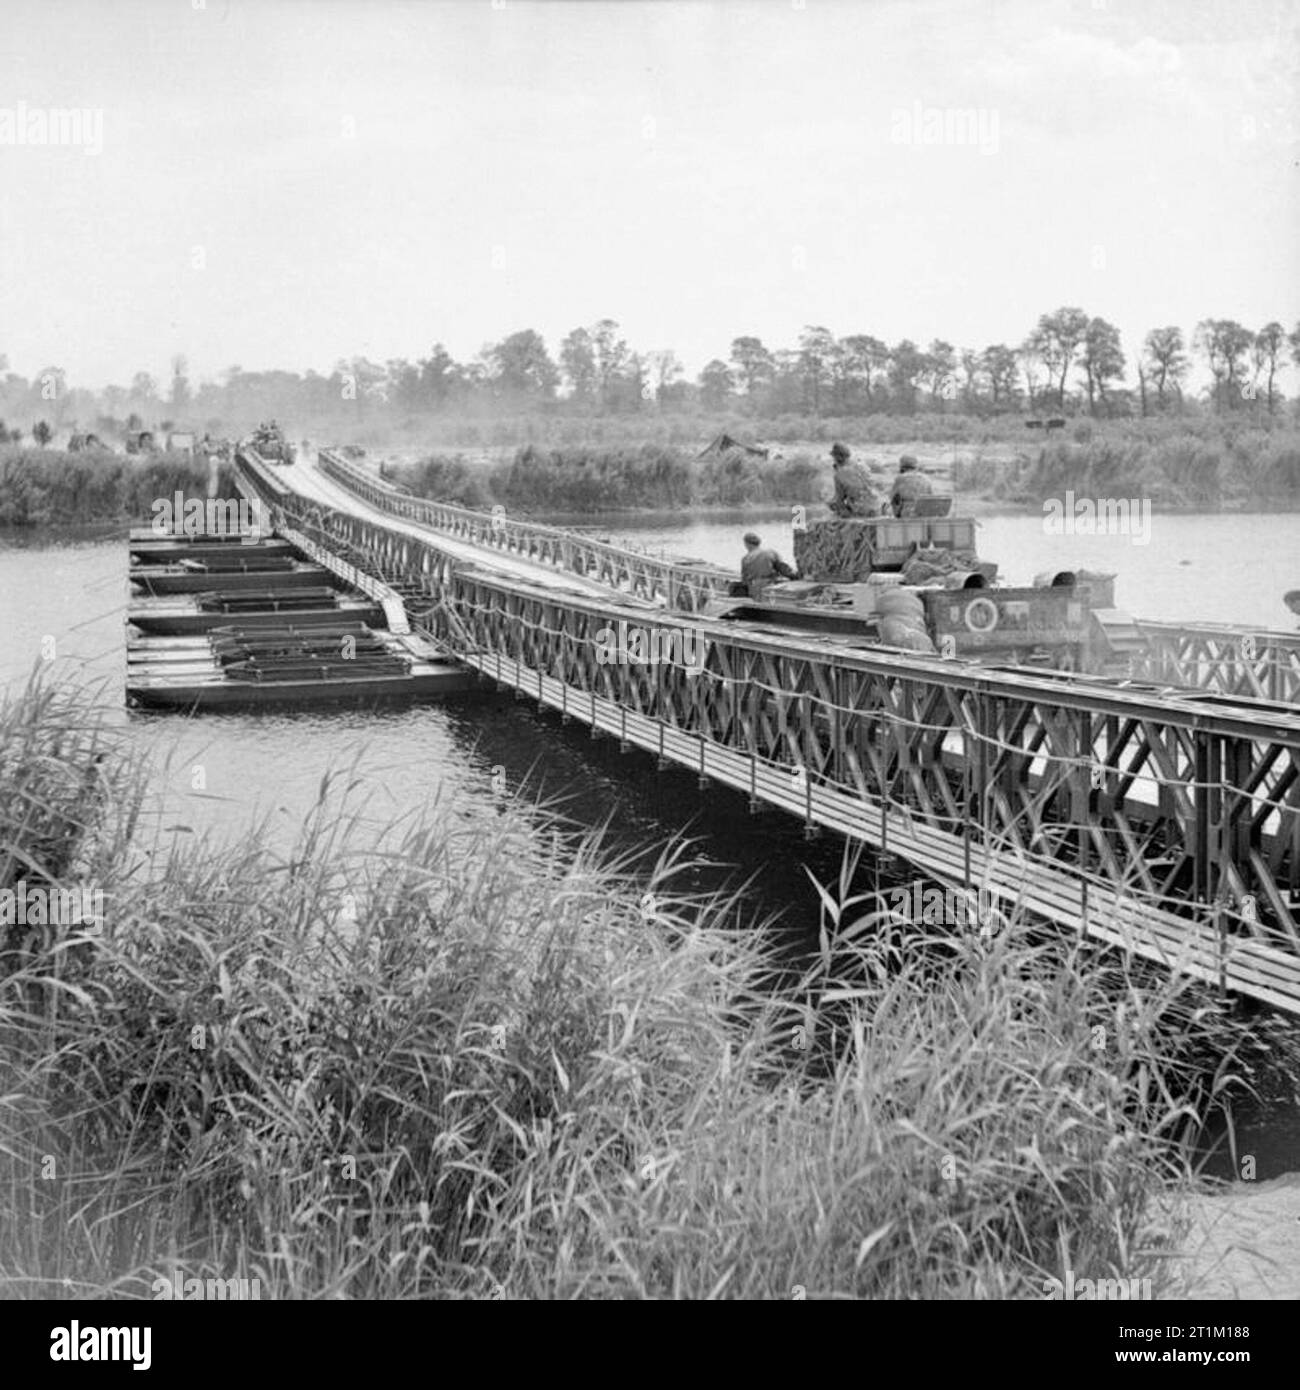 The British Army in Normandy 1944 Cromwell tanks moving across 'York' bridge, a Bailey bridge over the Caen canal and the Orne river, during Operation 'Goodwood', 18 July 1944. Stock Photo